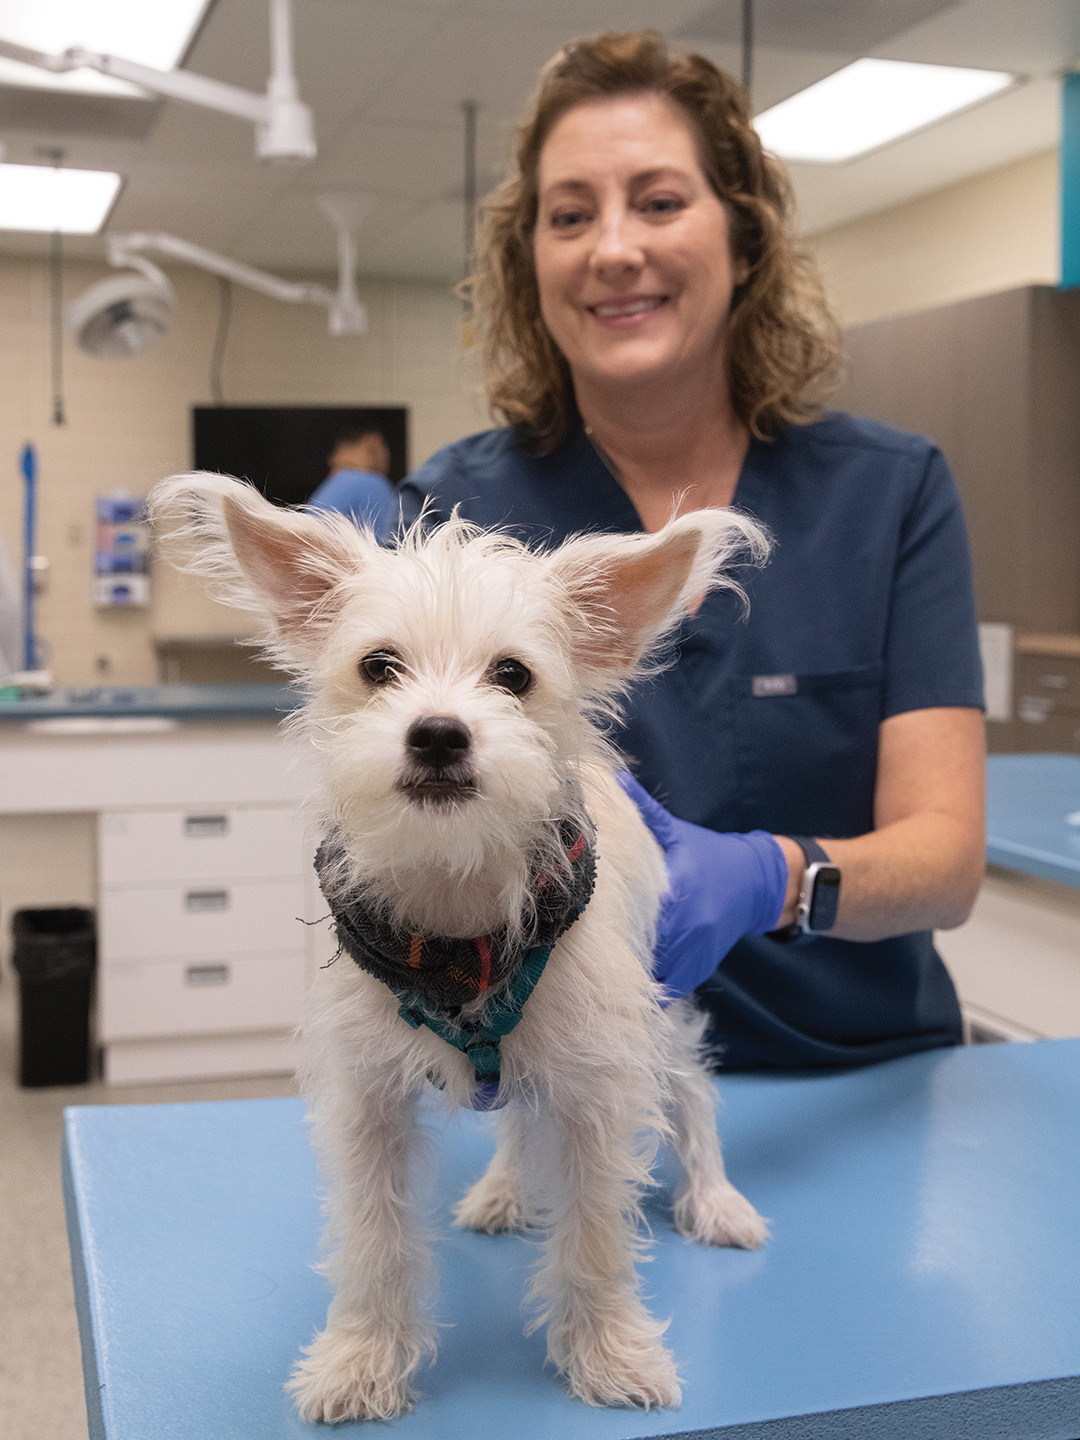 A white scruffy puppy standing on a table and being loosely held by a veterinary technician in scrubs